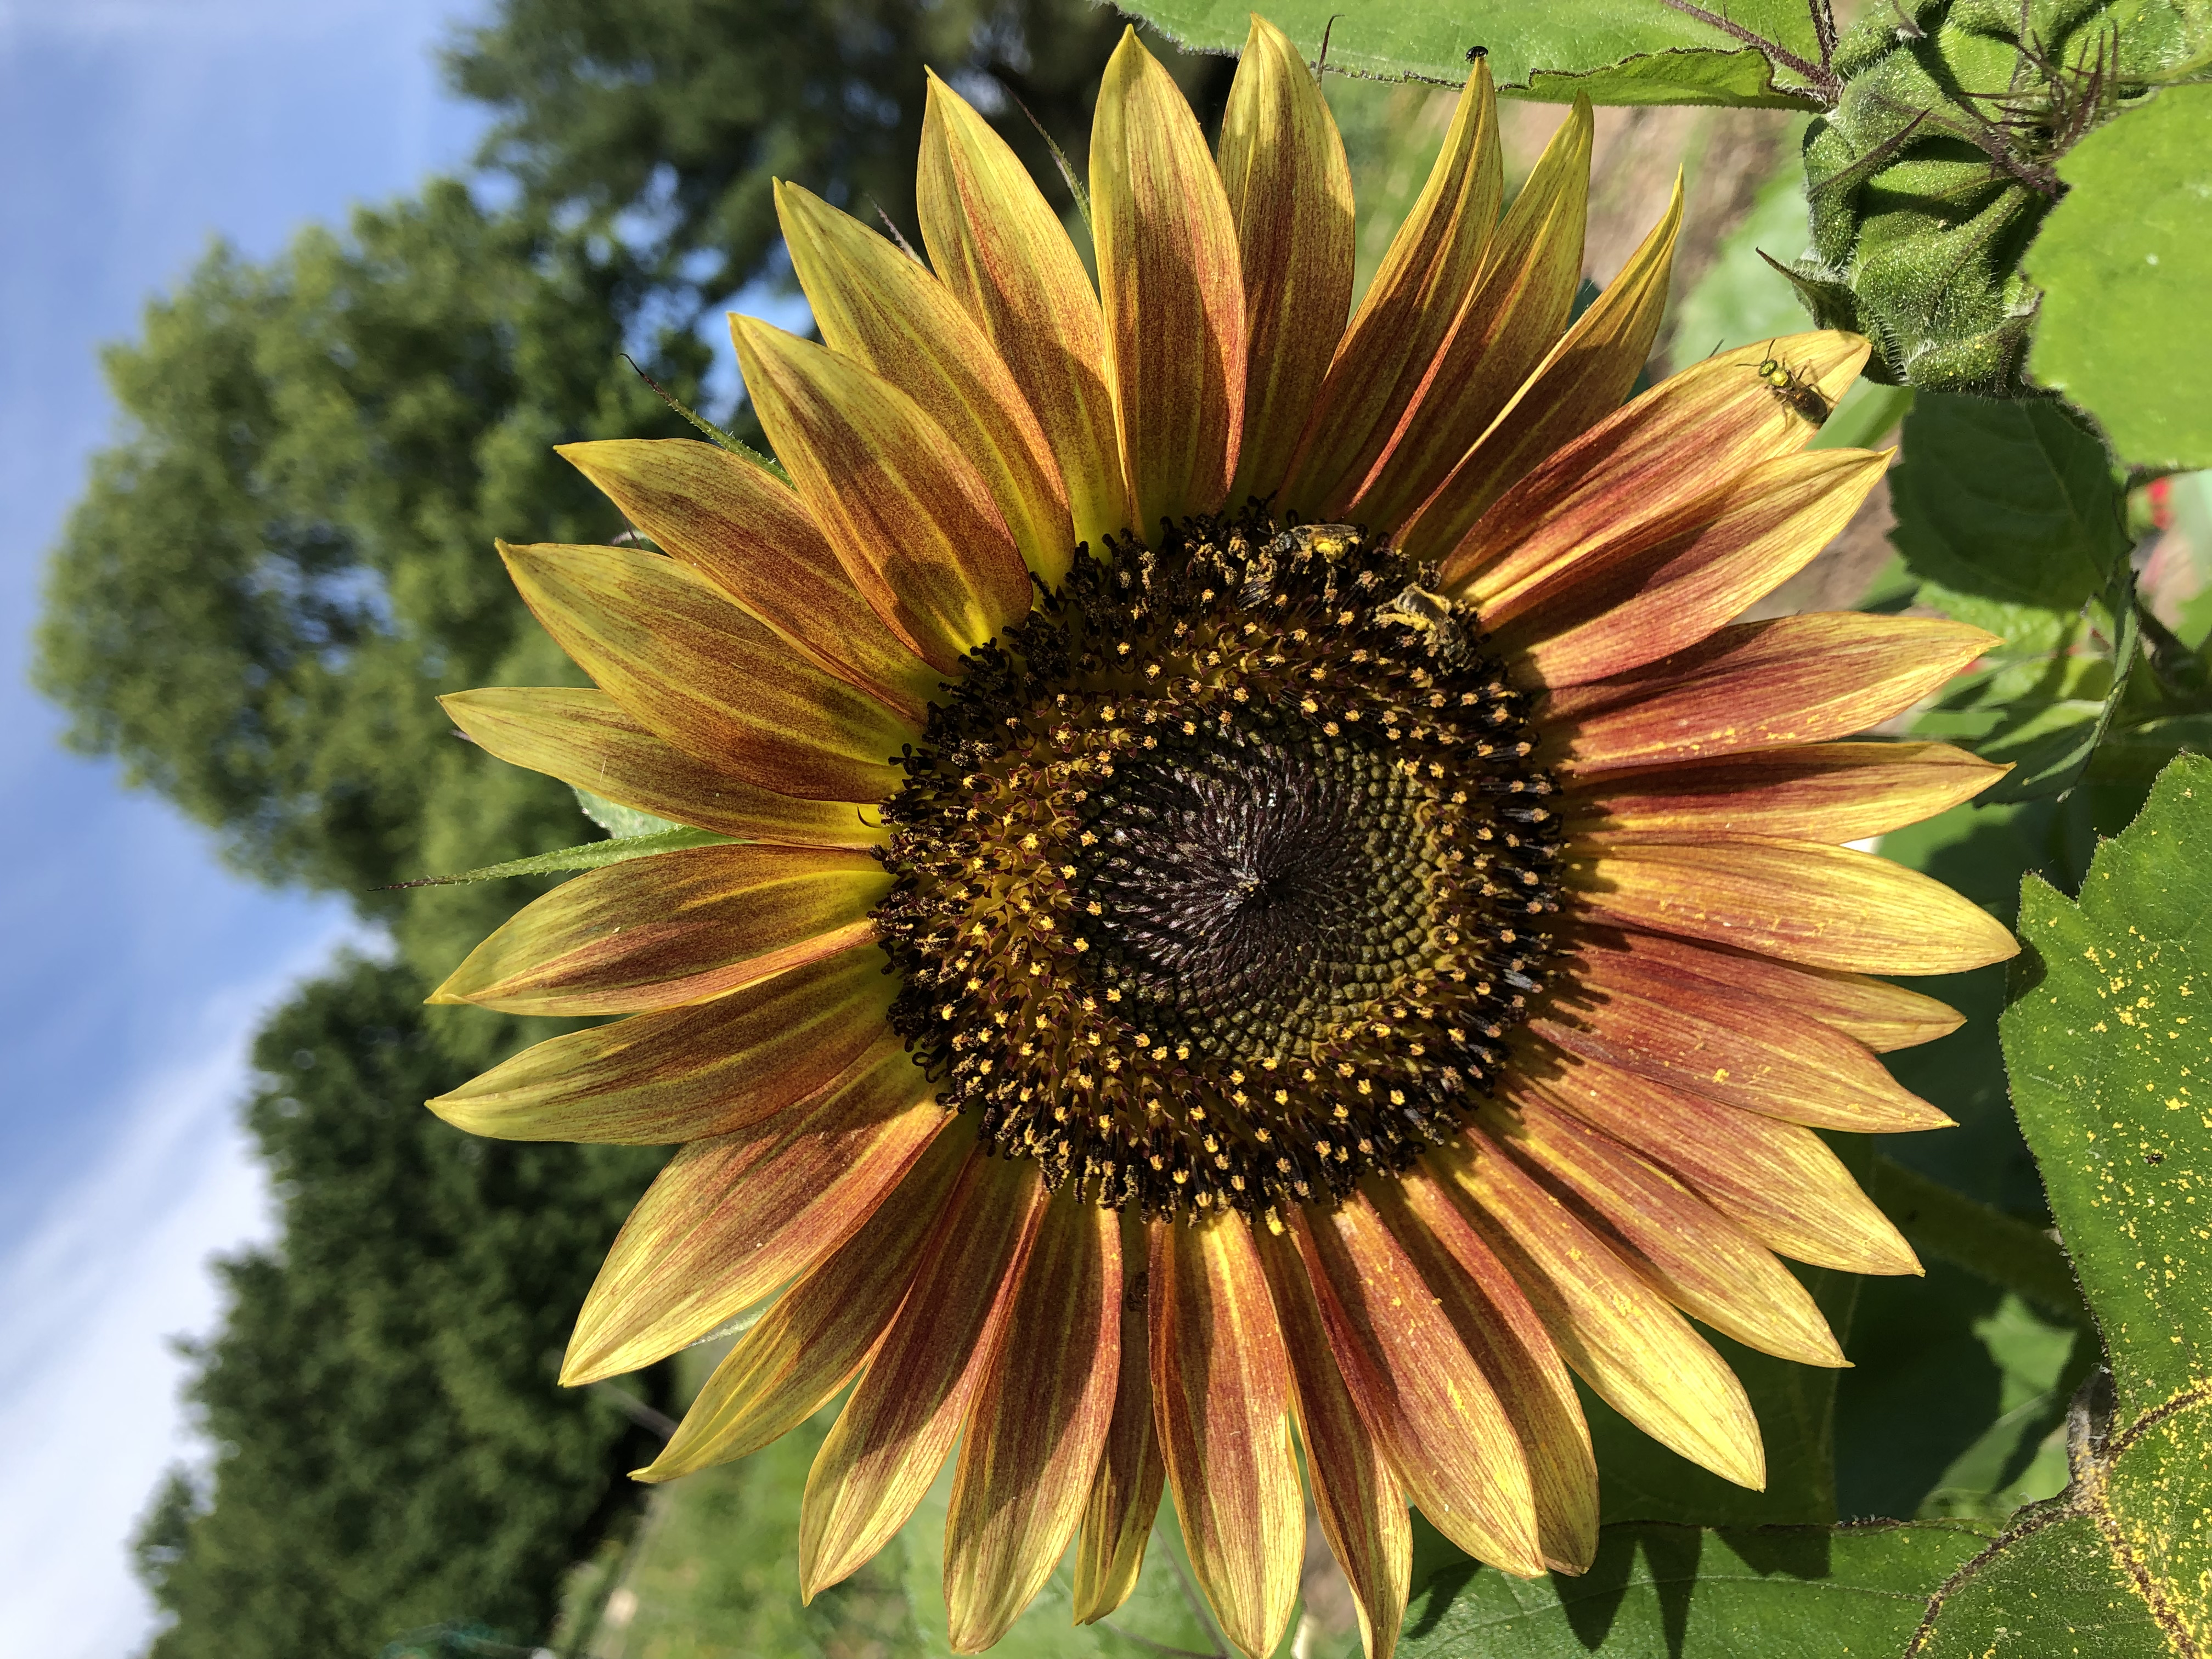 The first sunflower bloom. 